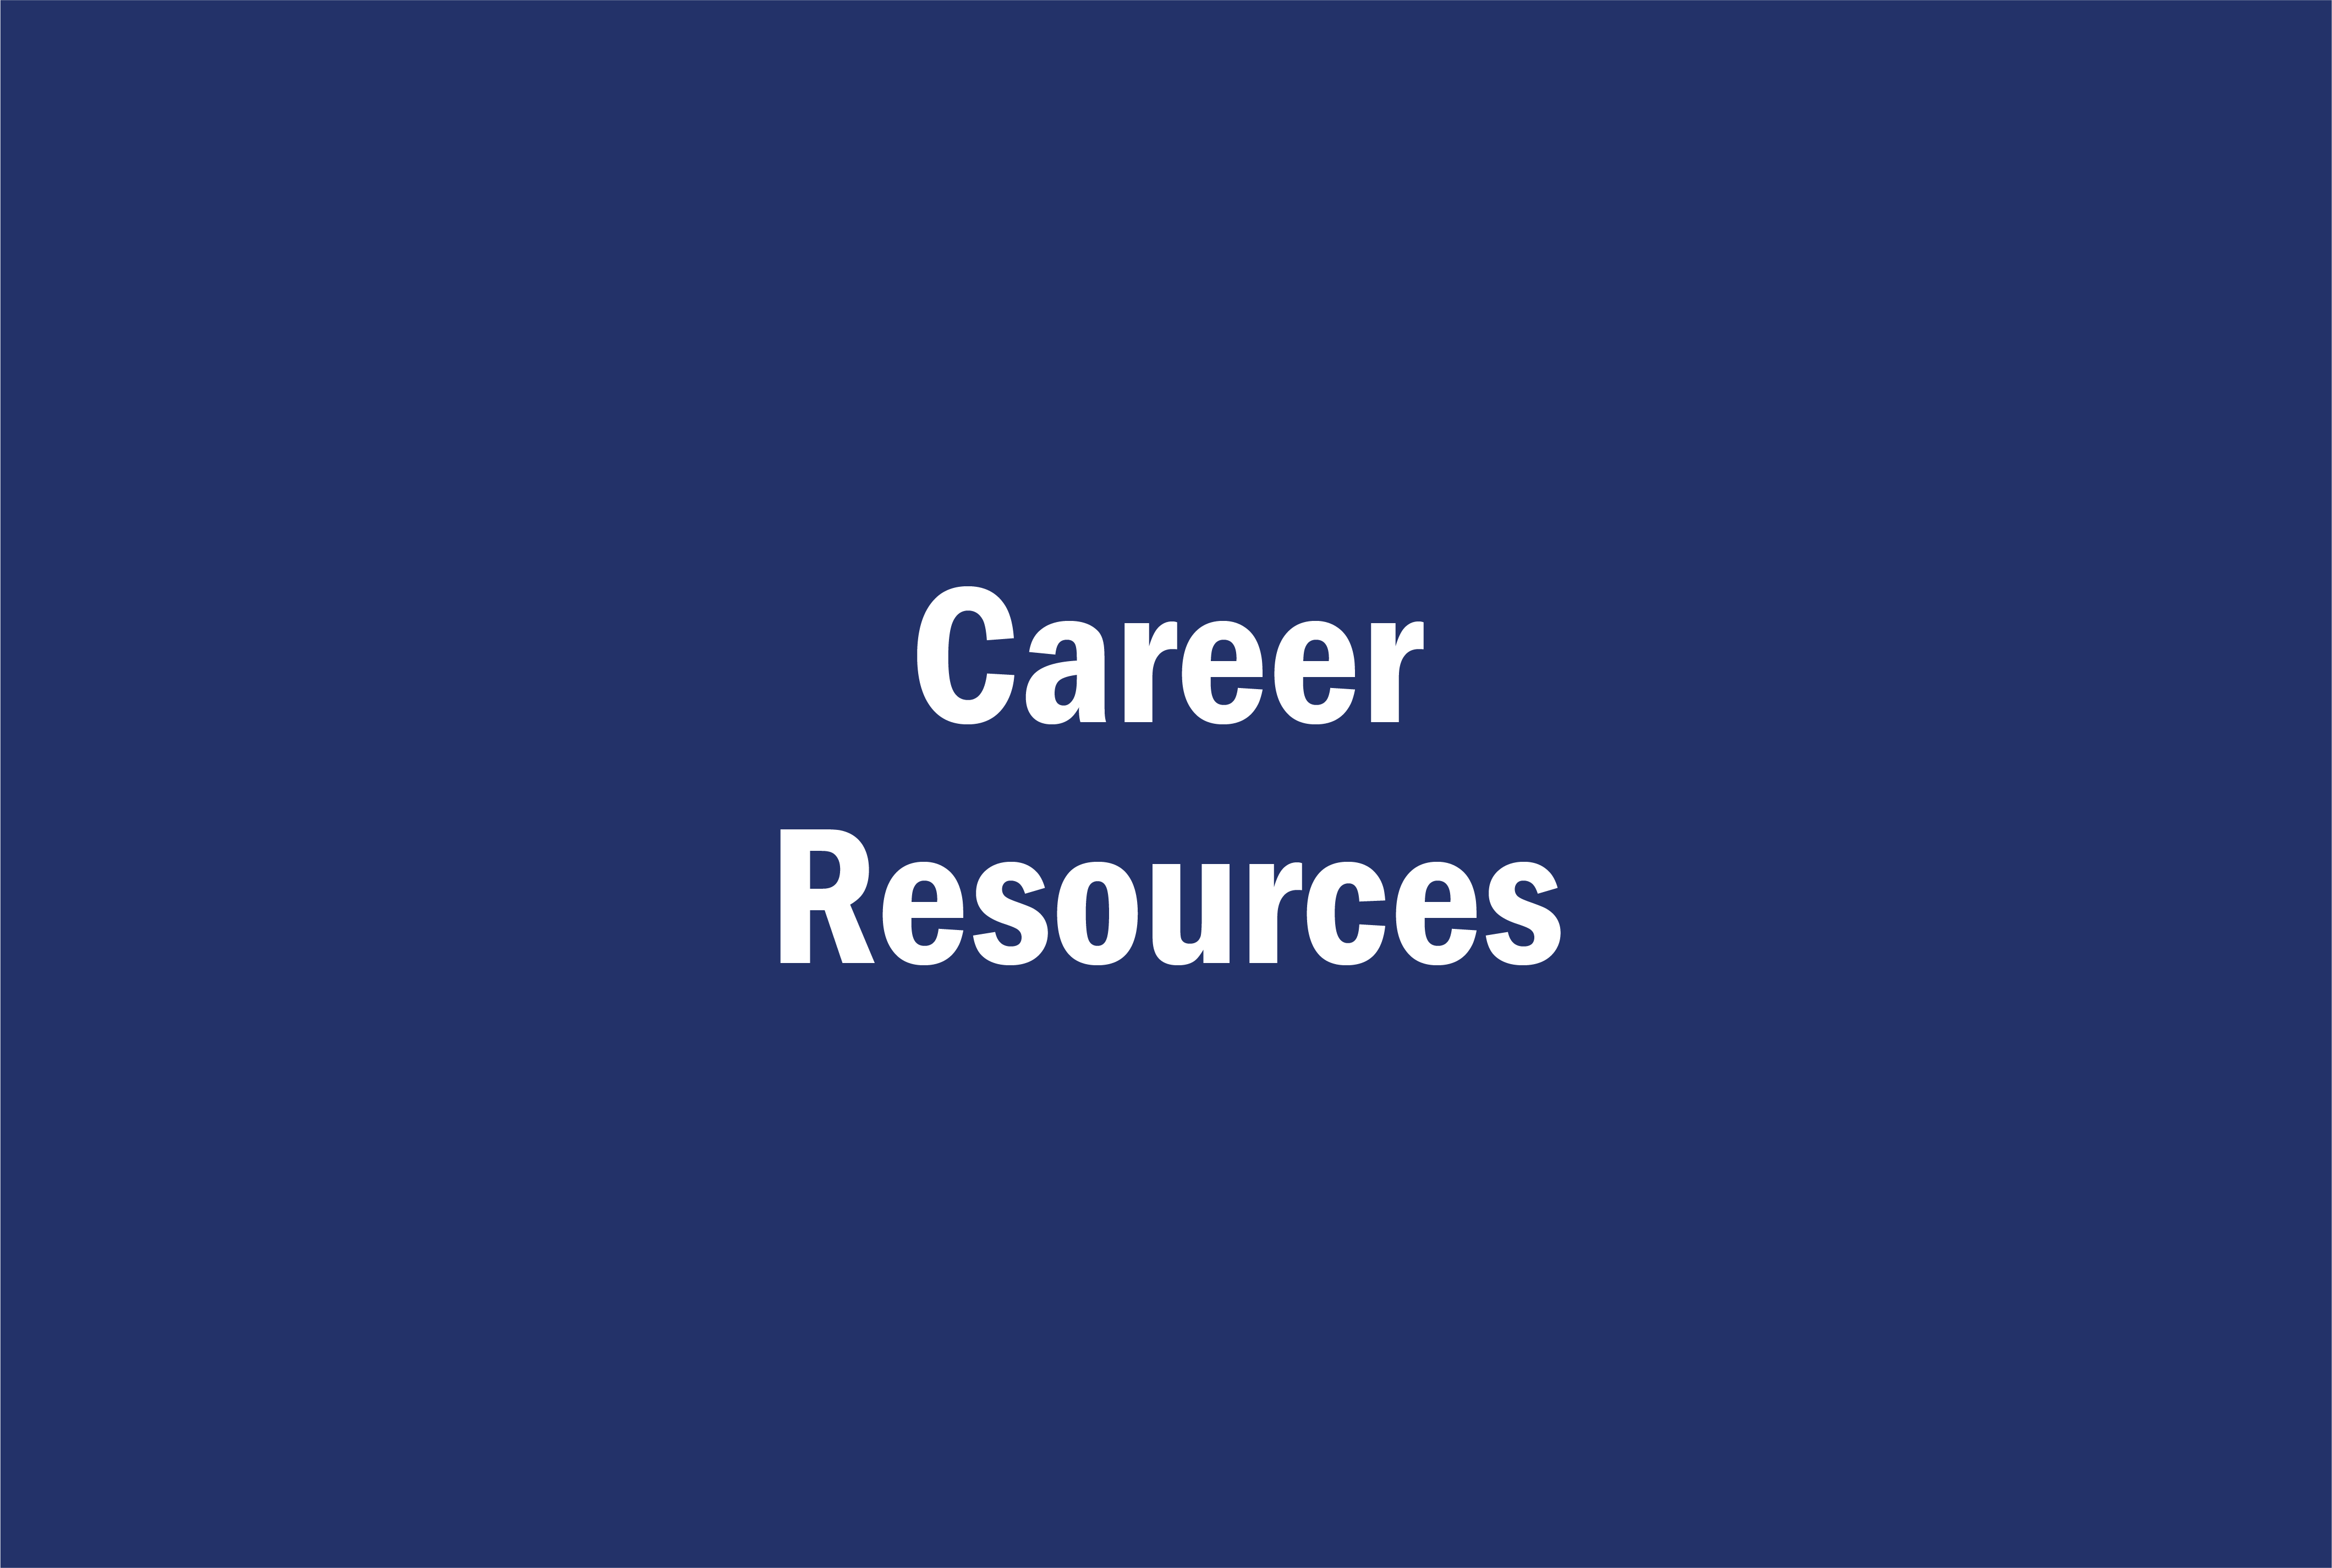 career resources